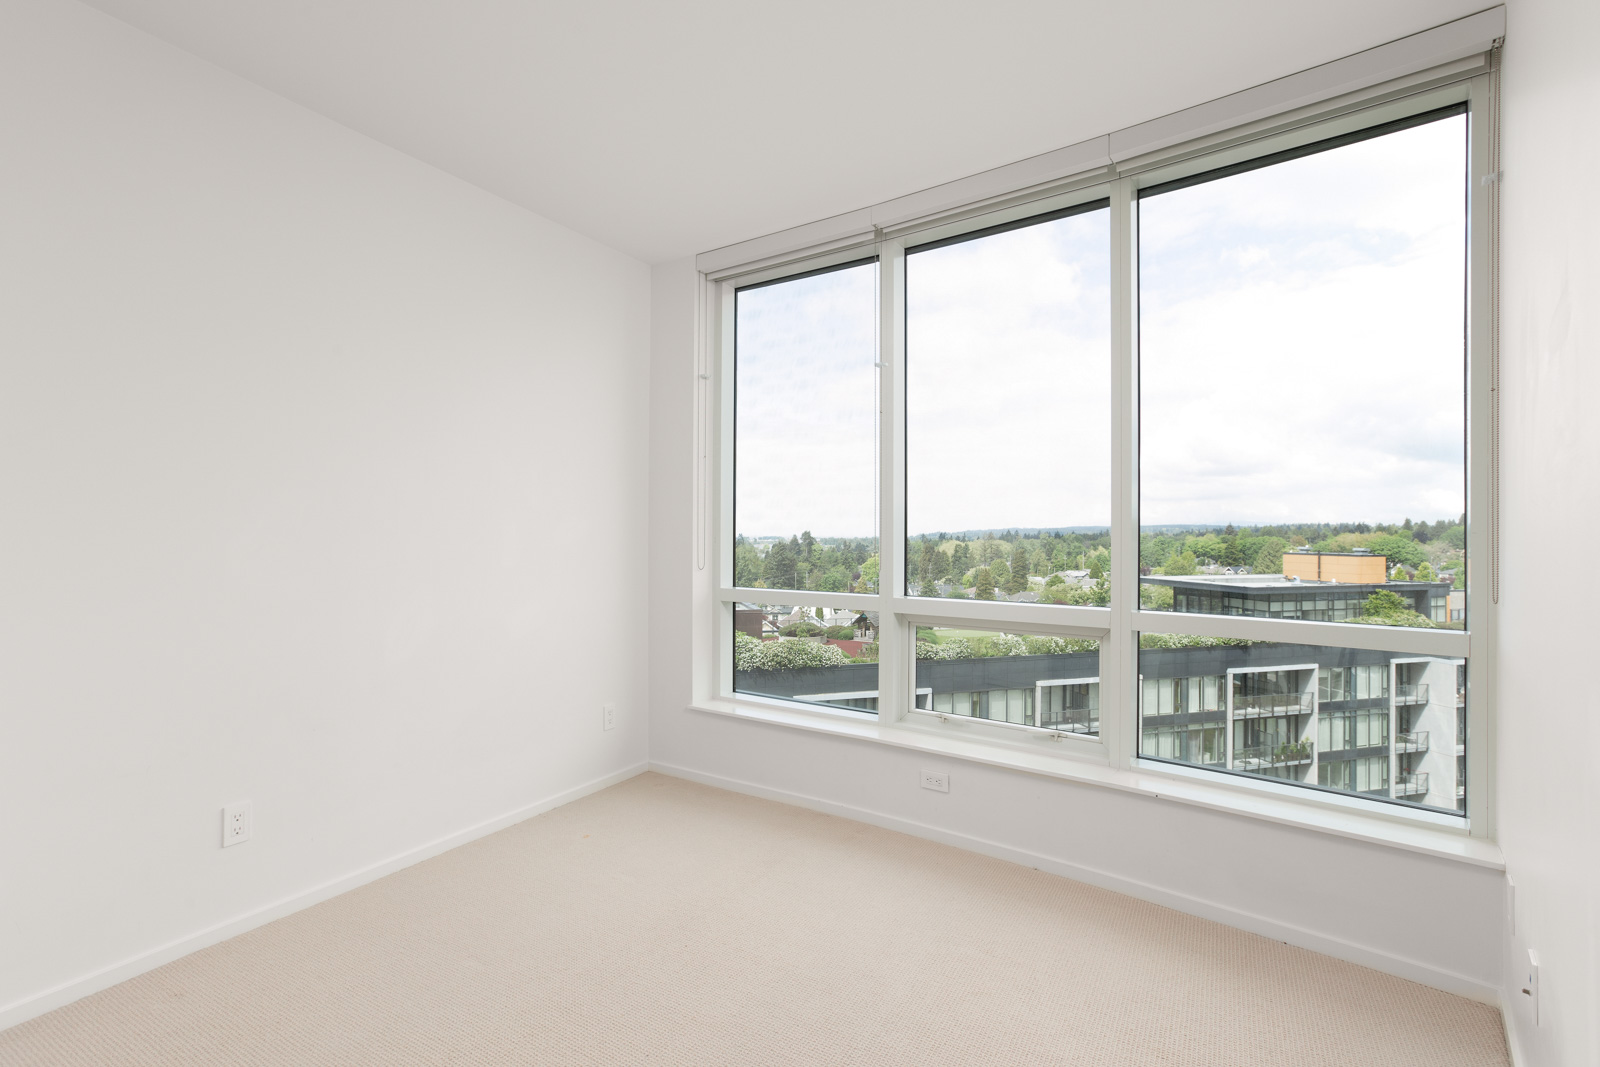 Bedroom with large window providing ample sunlight into the room with carpeted flooring in a rental condo in Vancouver offered by Birds Nest Properties